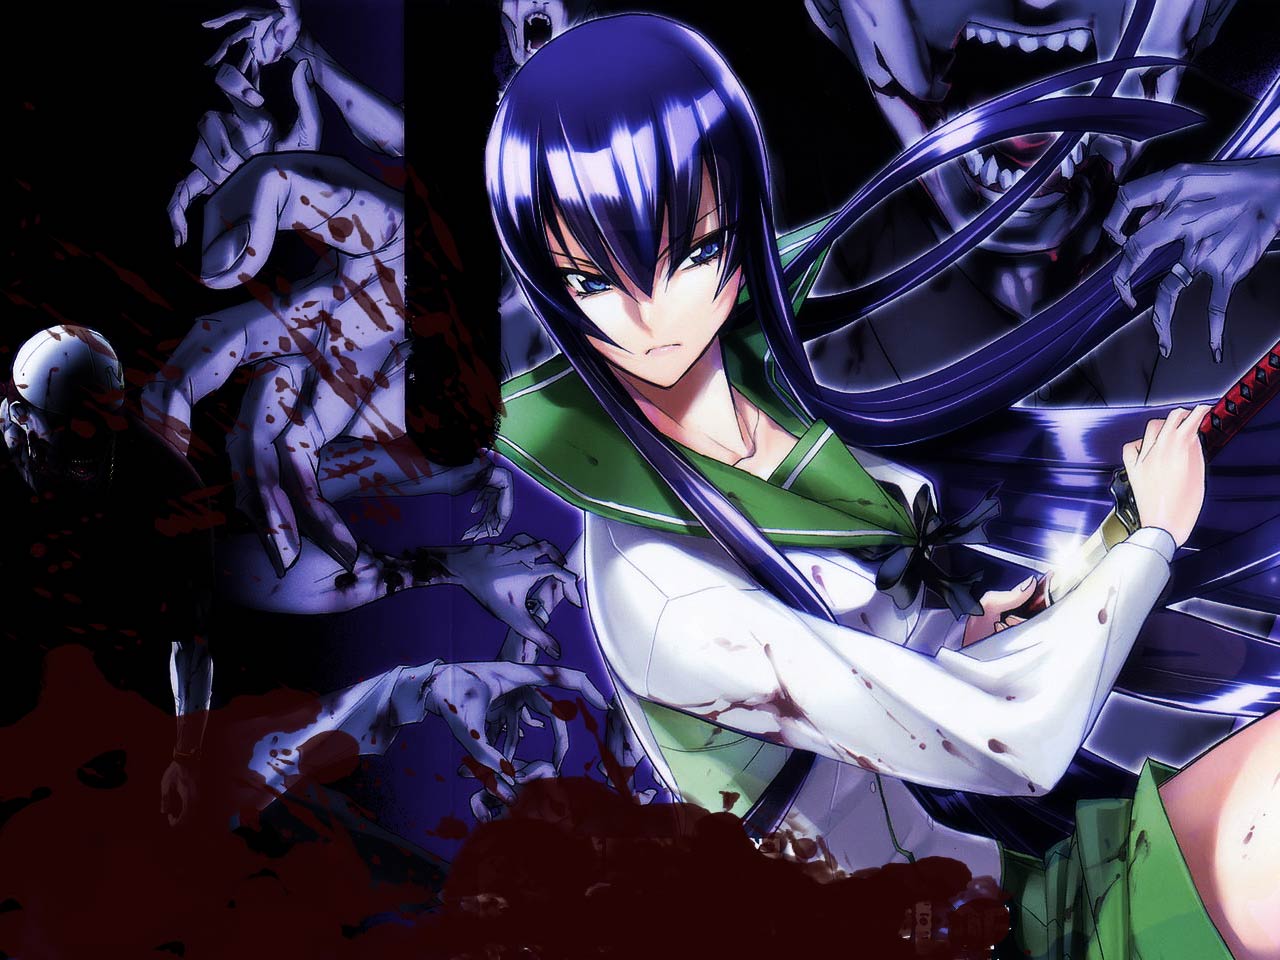 Anime picture highschool of the dead 2809x1912 121073 de